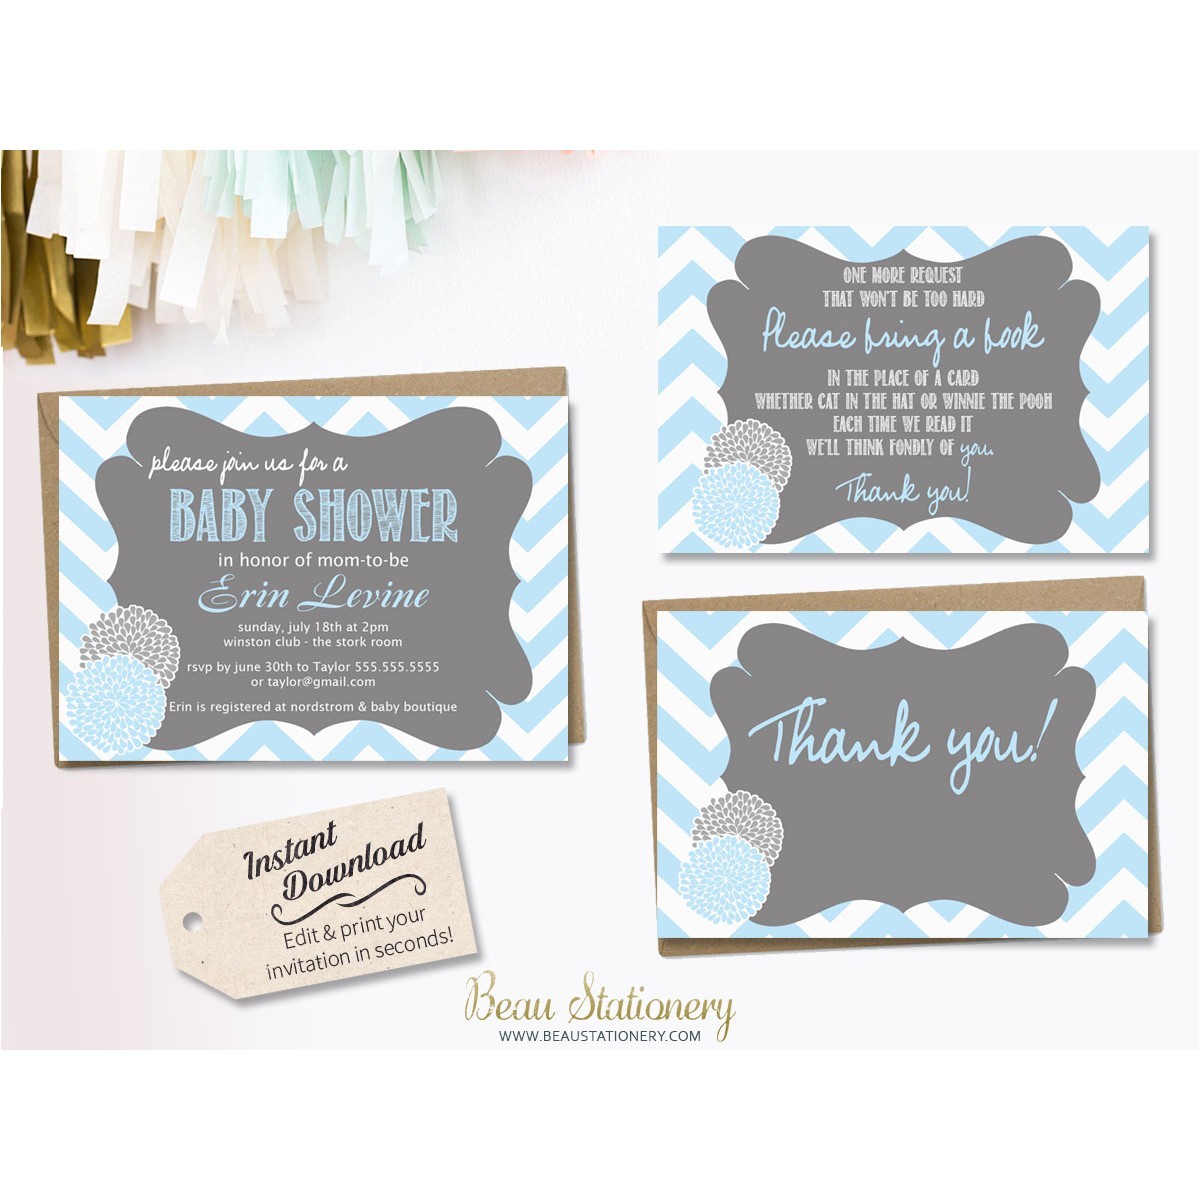 cards ideas with diy baby shower invitation kits hd images pictu